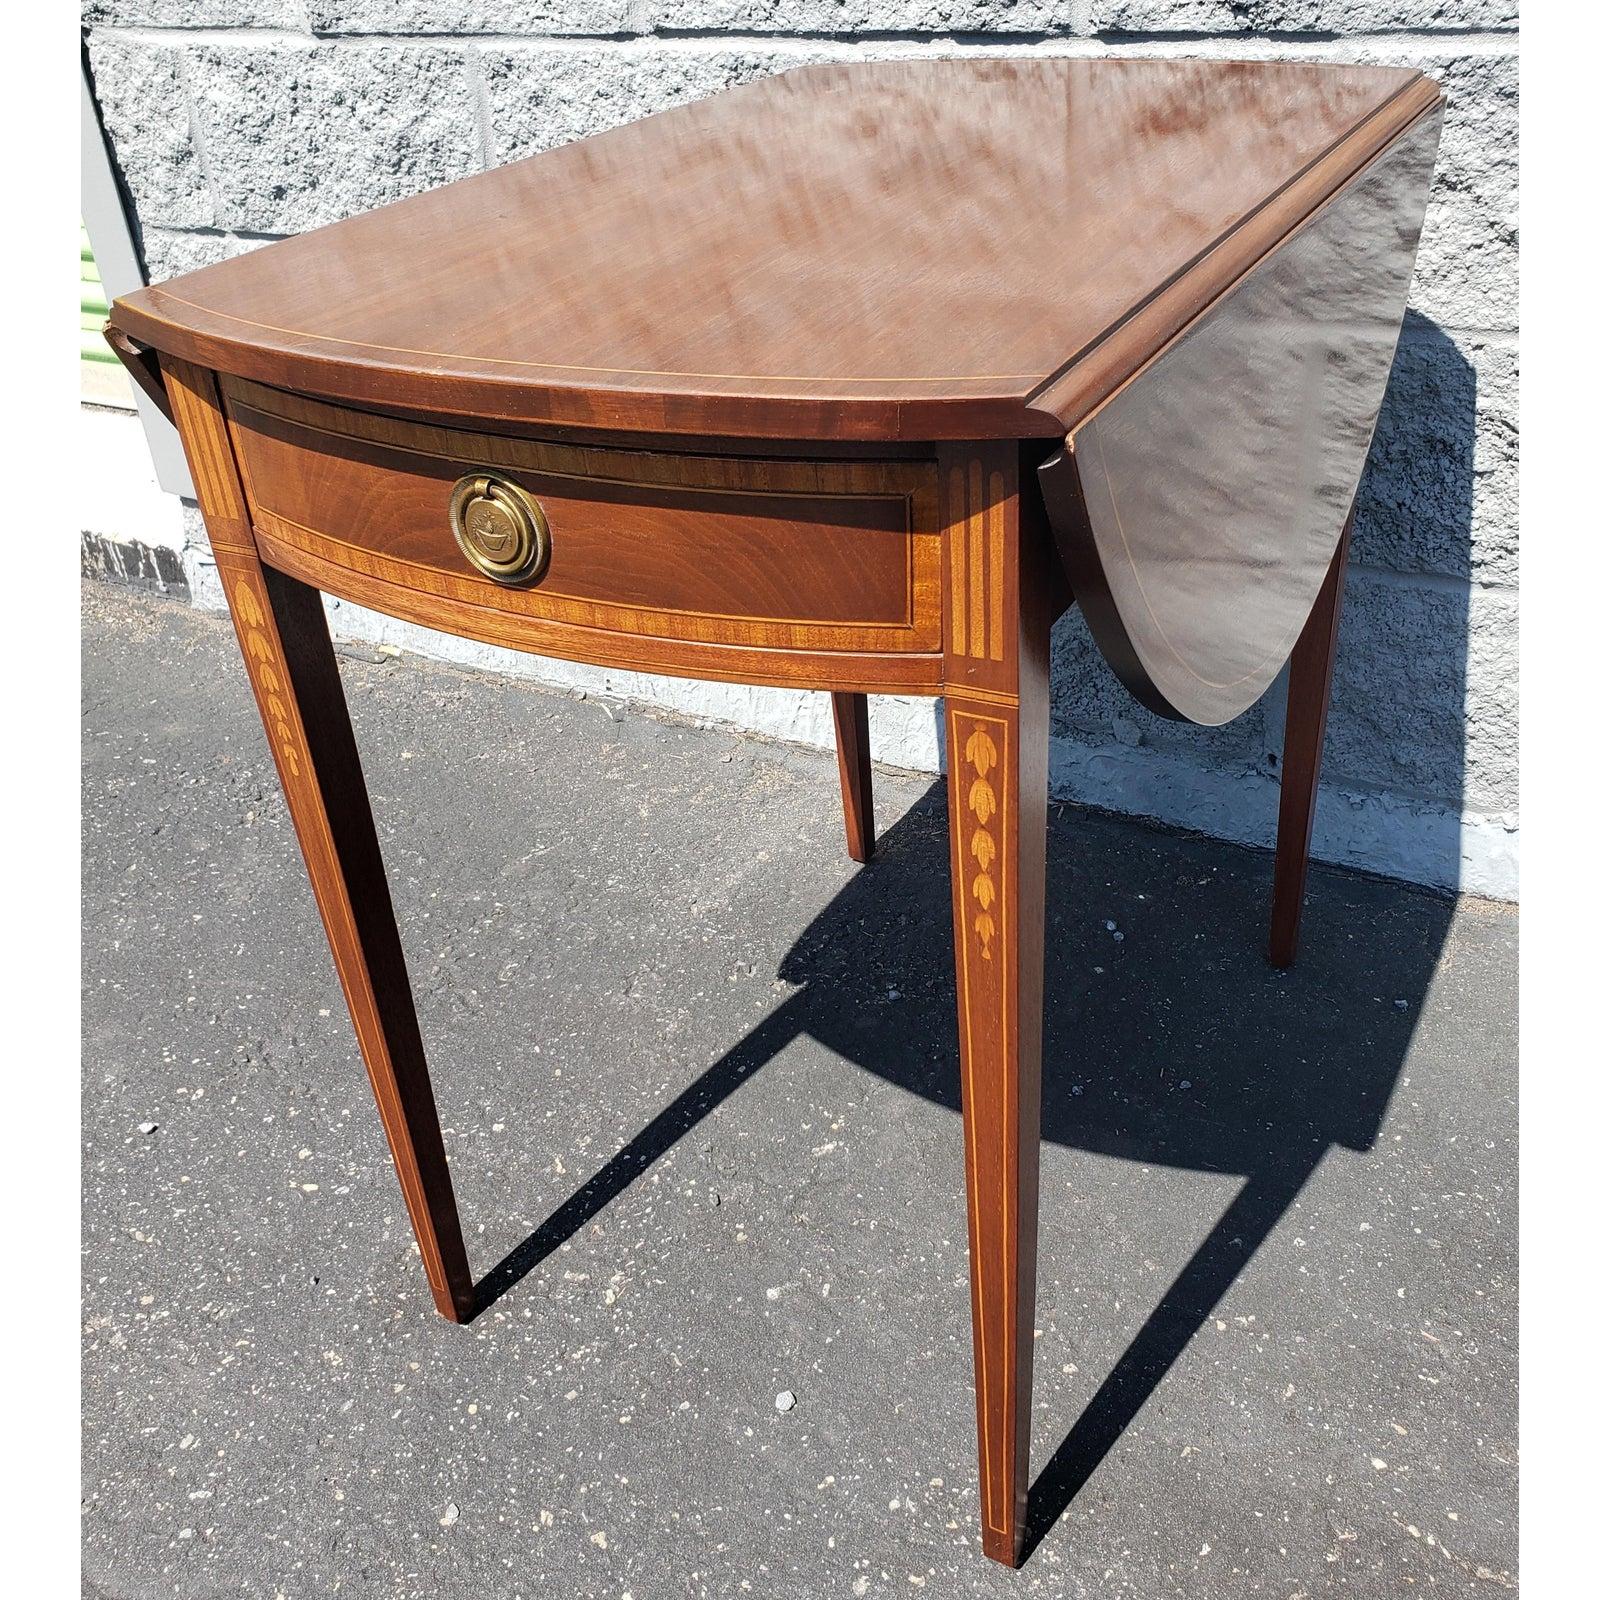 1970s Chippendale Inlaid Mahogany and Satin Wood Drop Leaf Pembroke Table 2